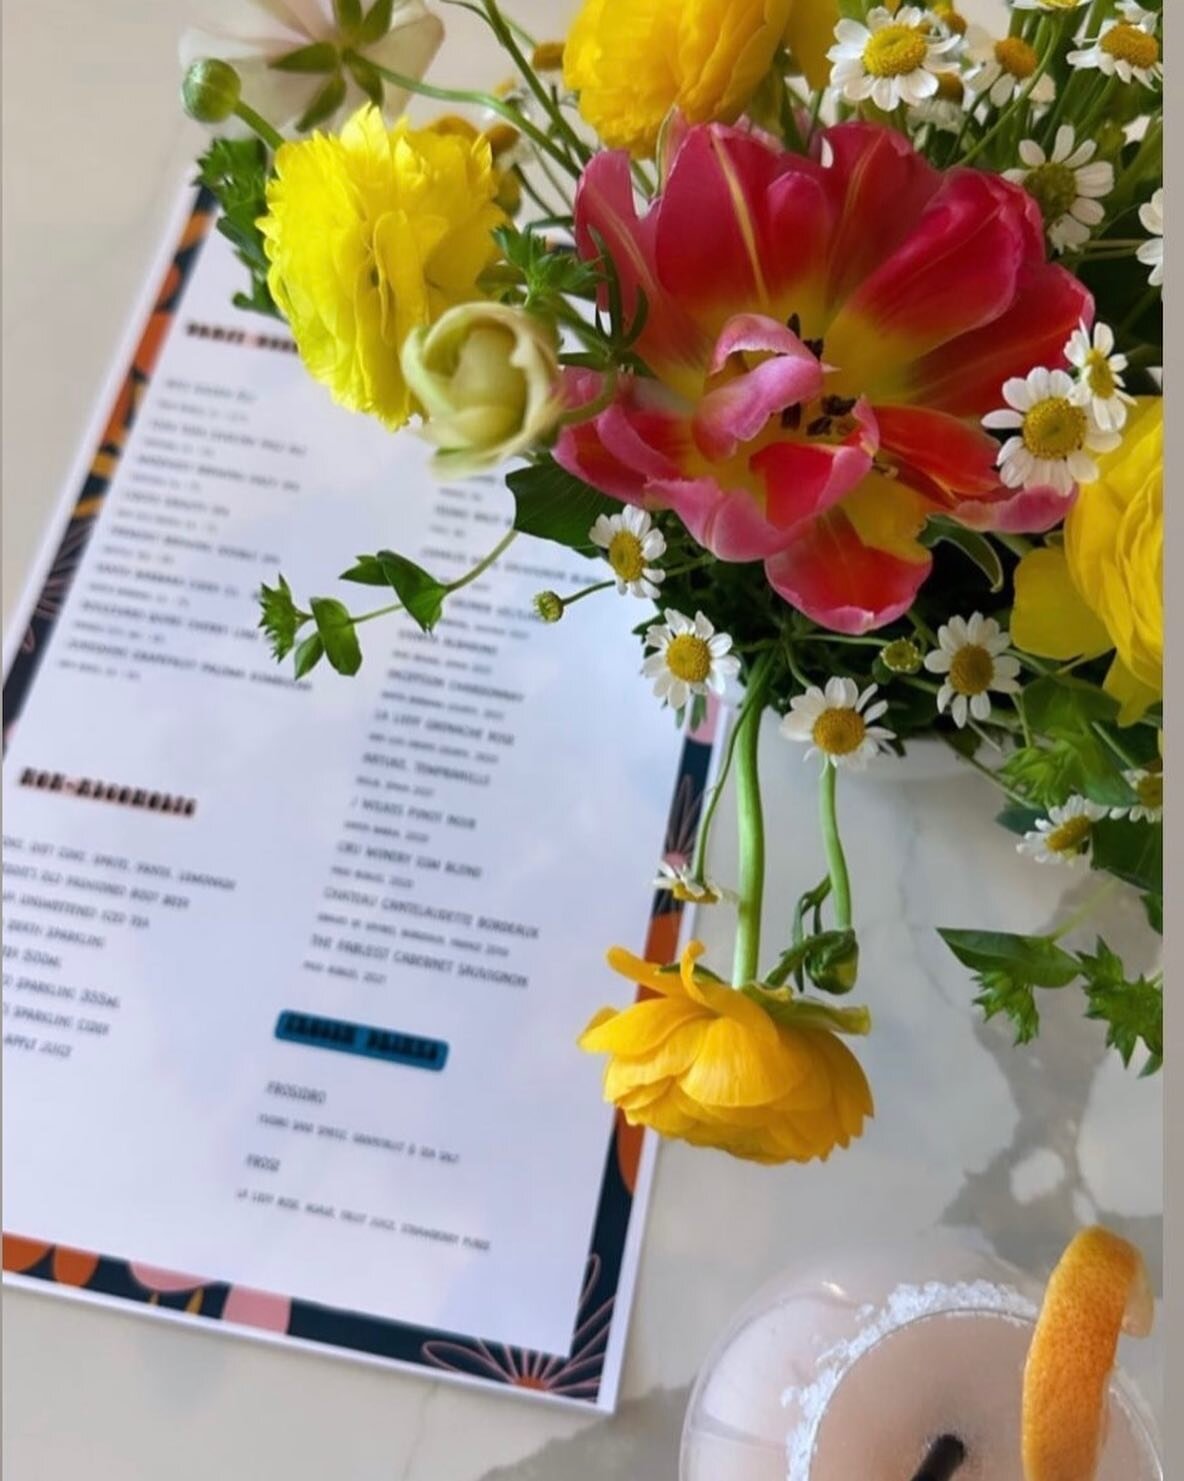 Come join us for Mother&rsquo;s Day Brunch on Sunday 5/13 🤍
Brunch service is 11-2
@everythingsfinemusic plays 1:30-3:30
All day menu from 2-5
Moms enjoy a free glass of sparkling!
Reservations recommended for groups of 6 or more by DM or 805-837-85